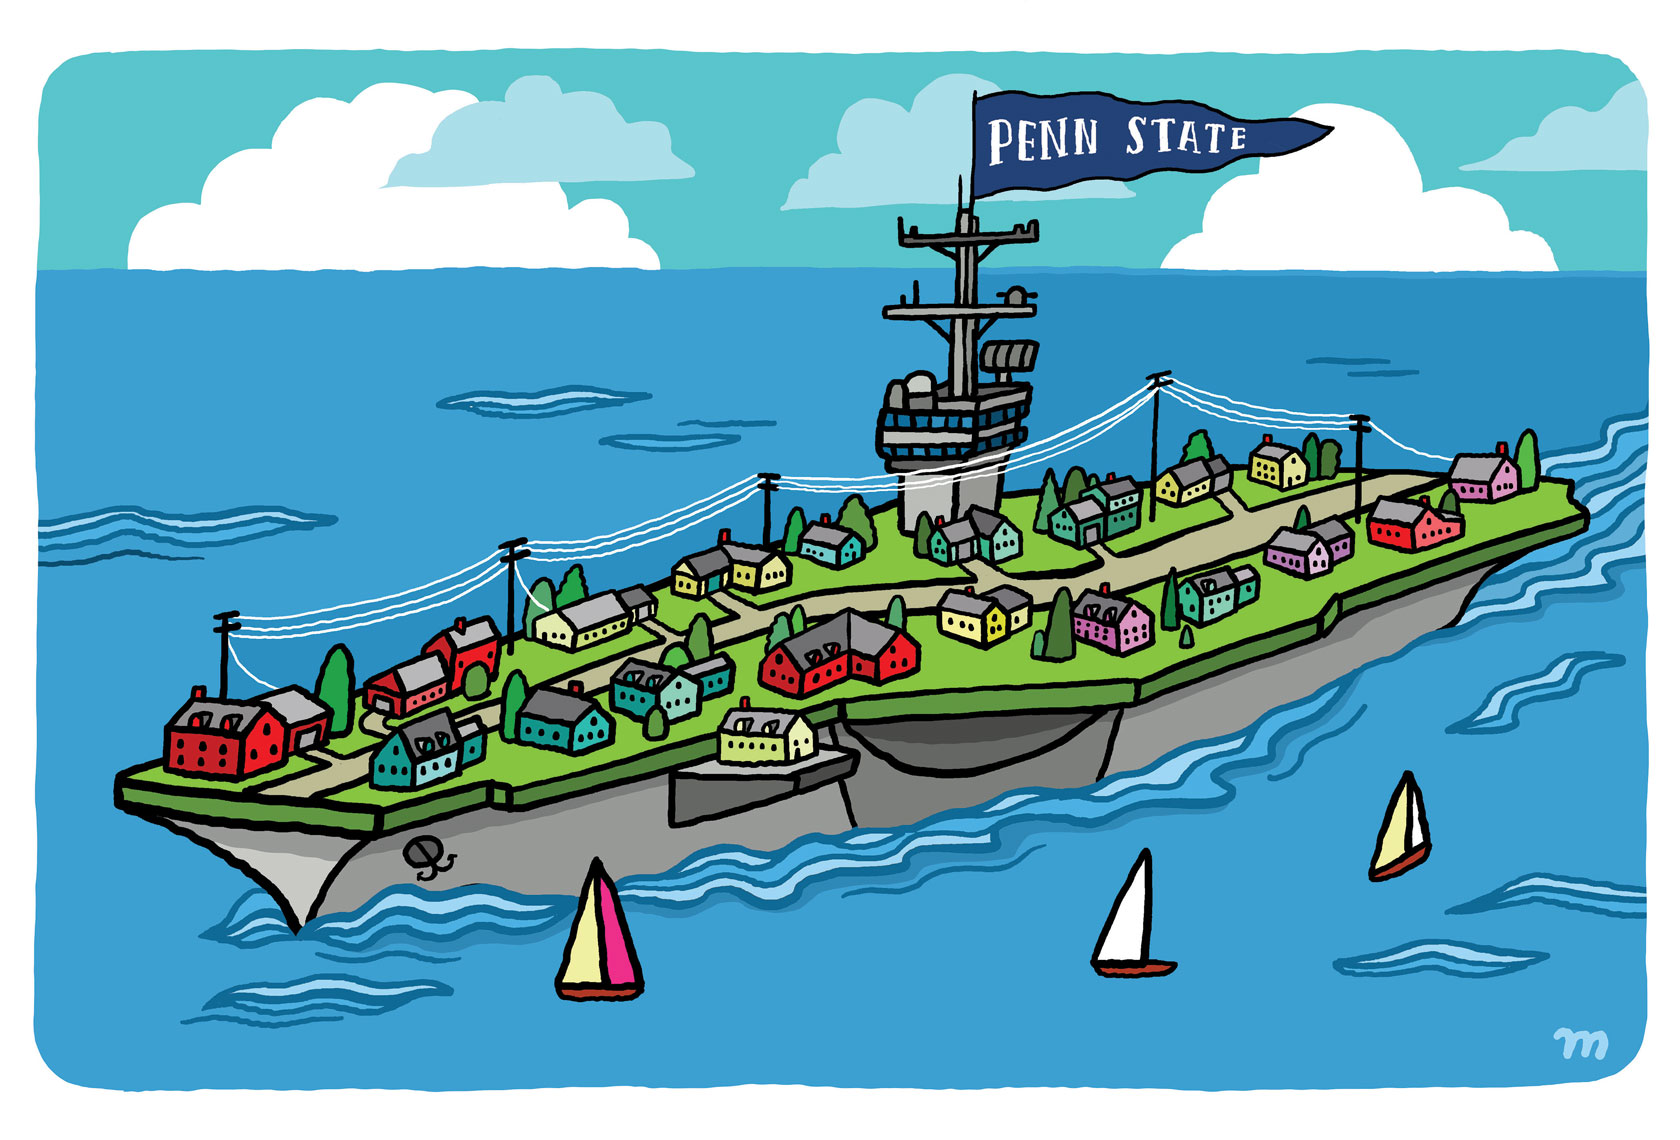 illustration of a Navy cruise ship with grass and houses on the deck and a blue Penn State flag flying on the mast, by Aaron Meshon